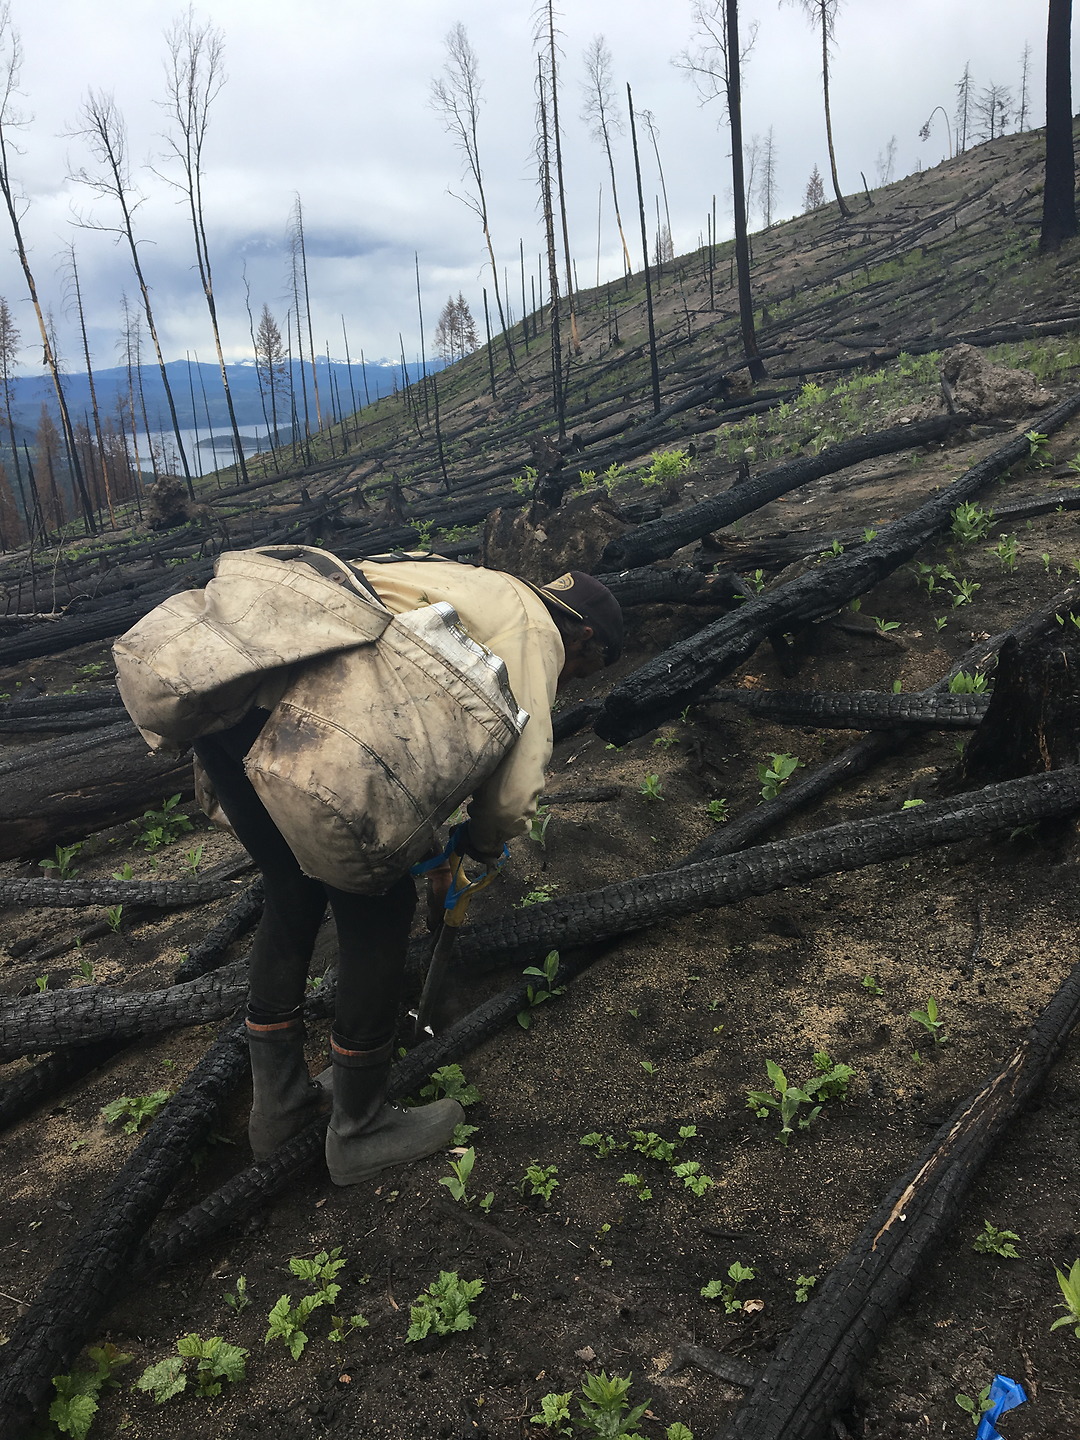 Planting trees in a burnt down field